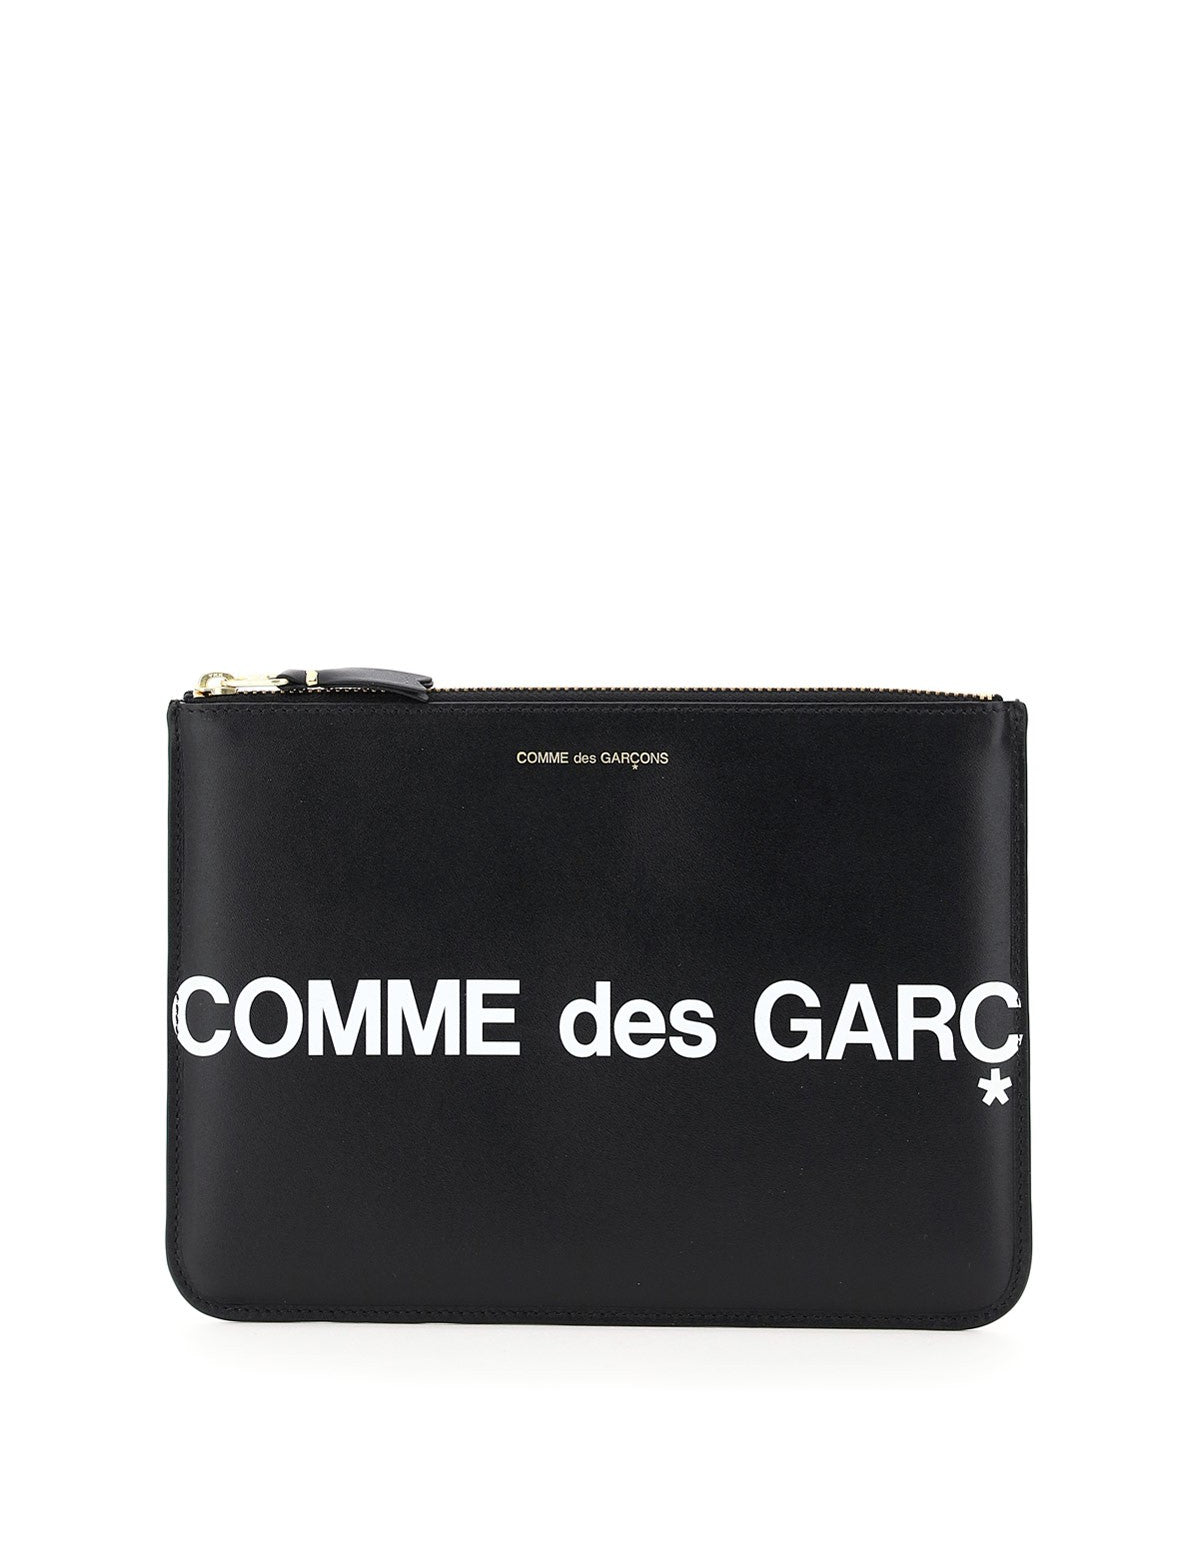 comme-des-garcons-wallet-leather-pouch-with-logo_bb150c28-7a7e-4bf4-863c-2c55aebf90b5.jpg